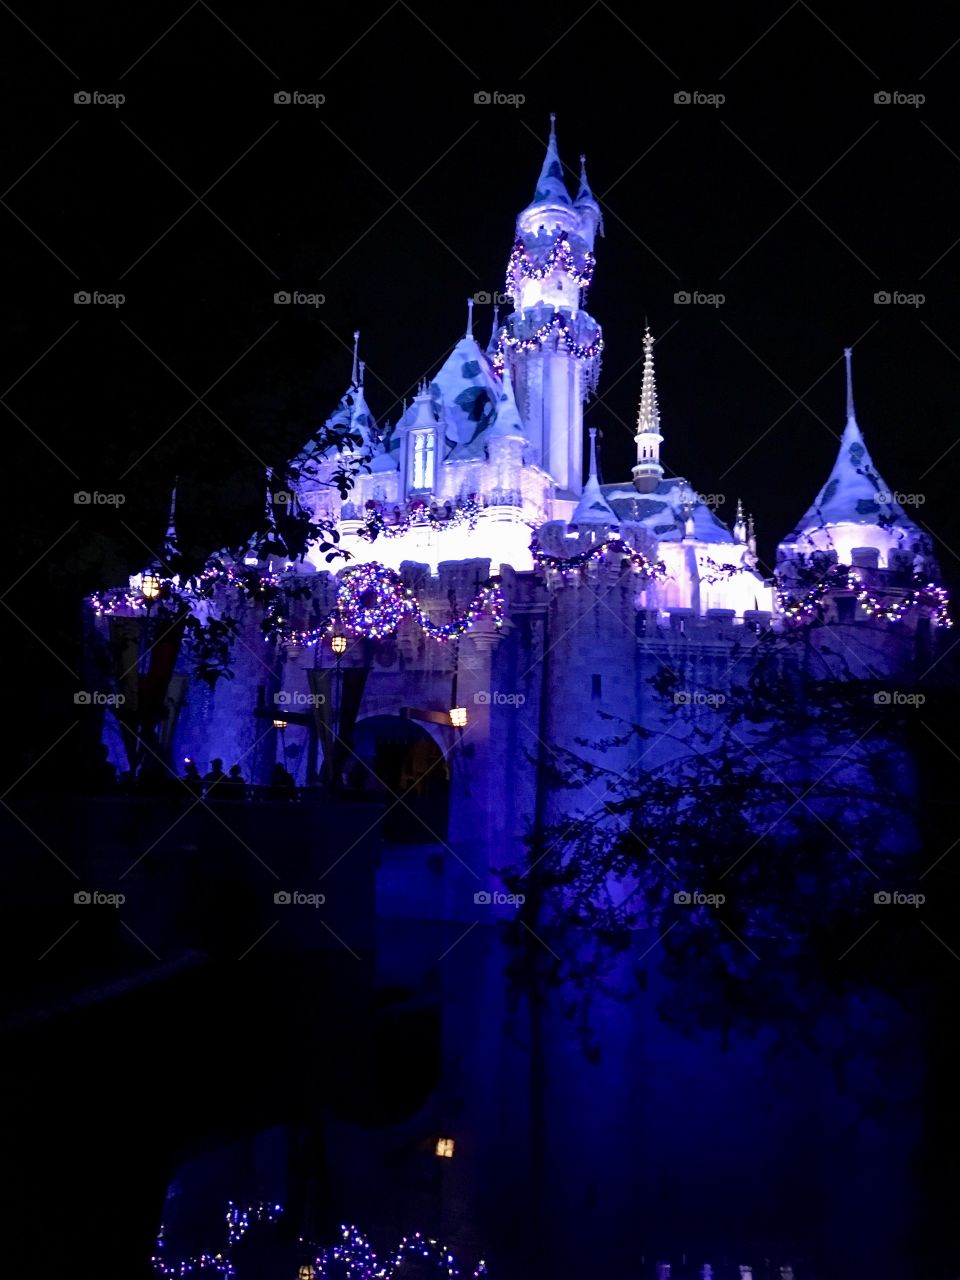 Sleeping Beauty’s Castle at night with lights.